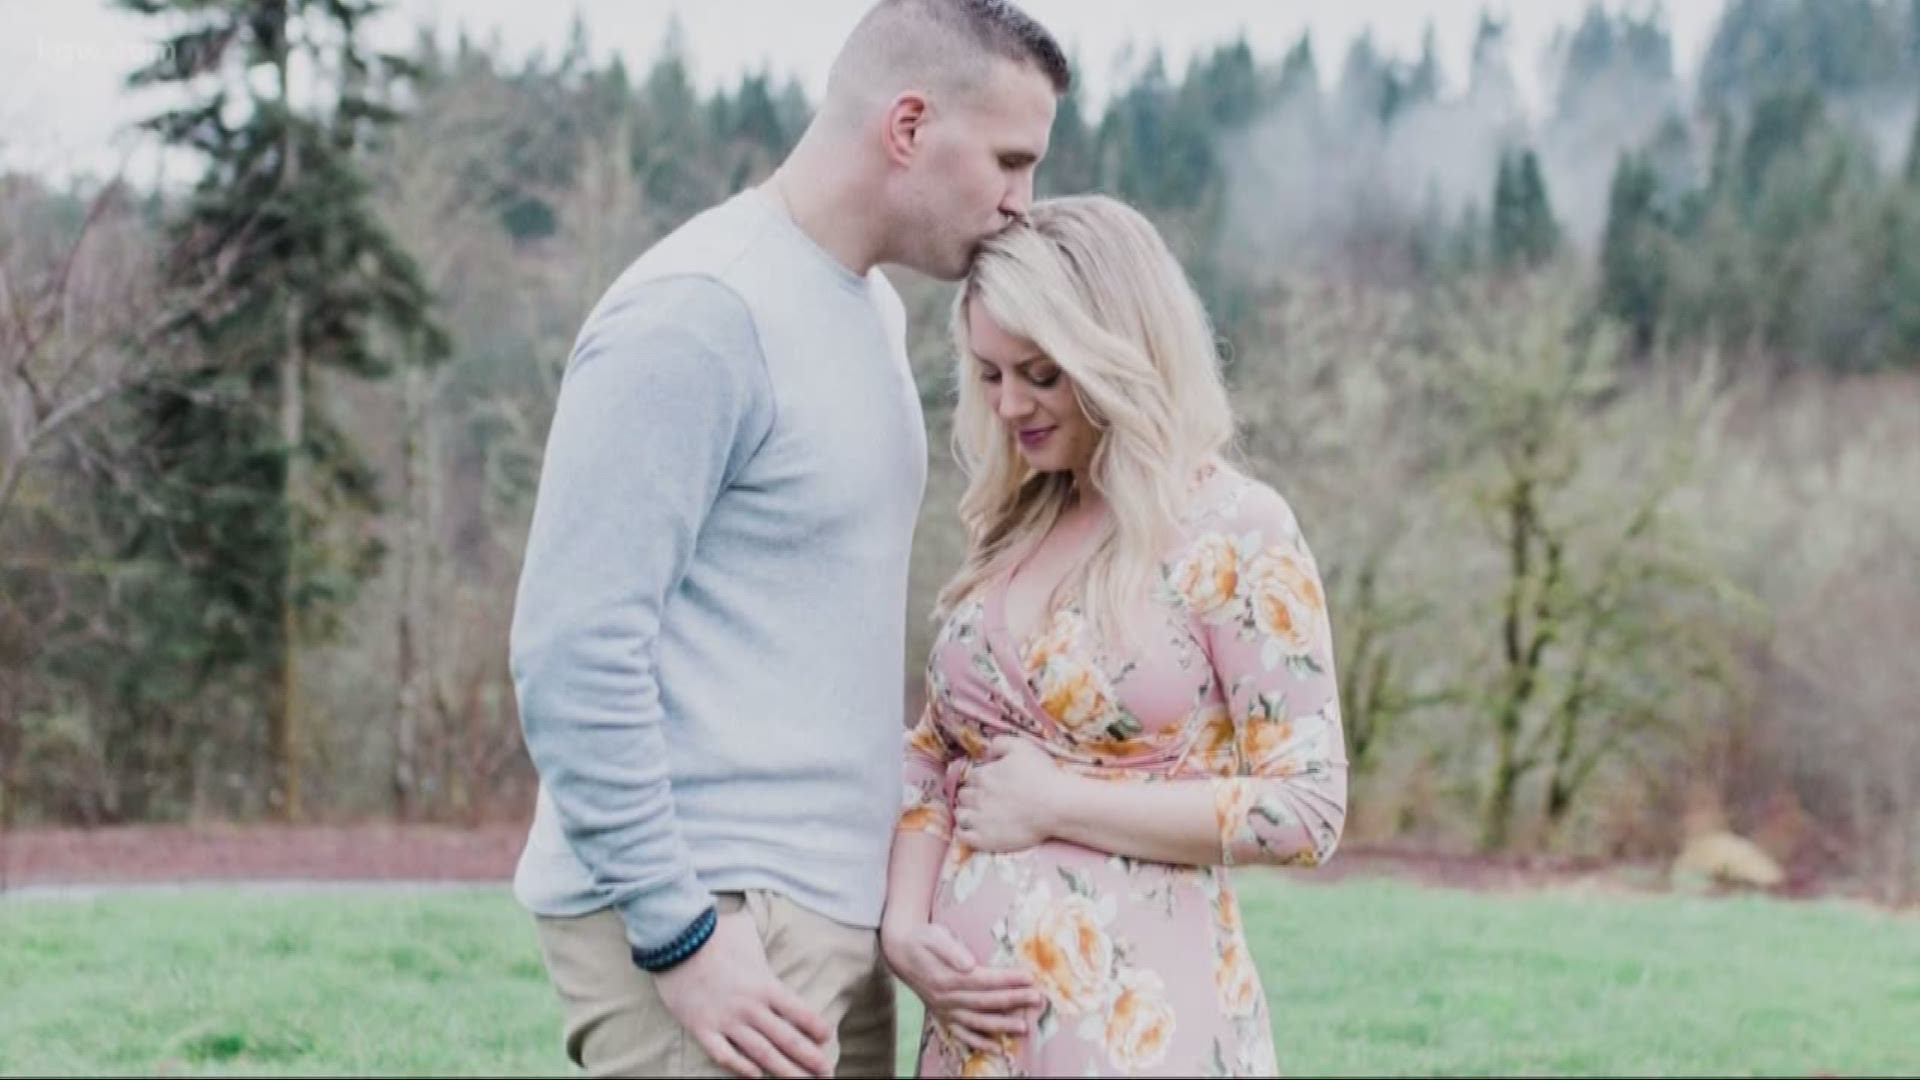 Ashley's twin gender reveal? It's a boy and girl!